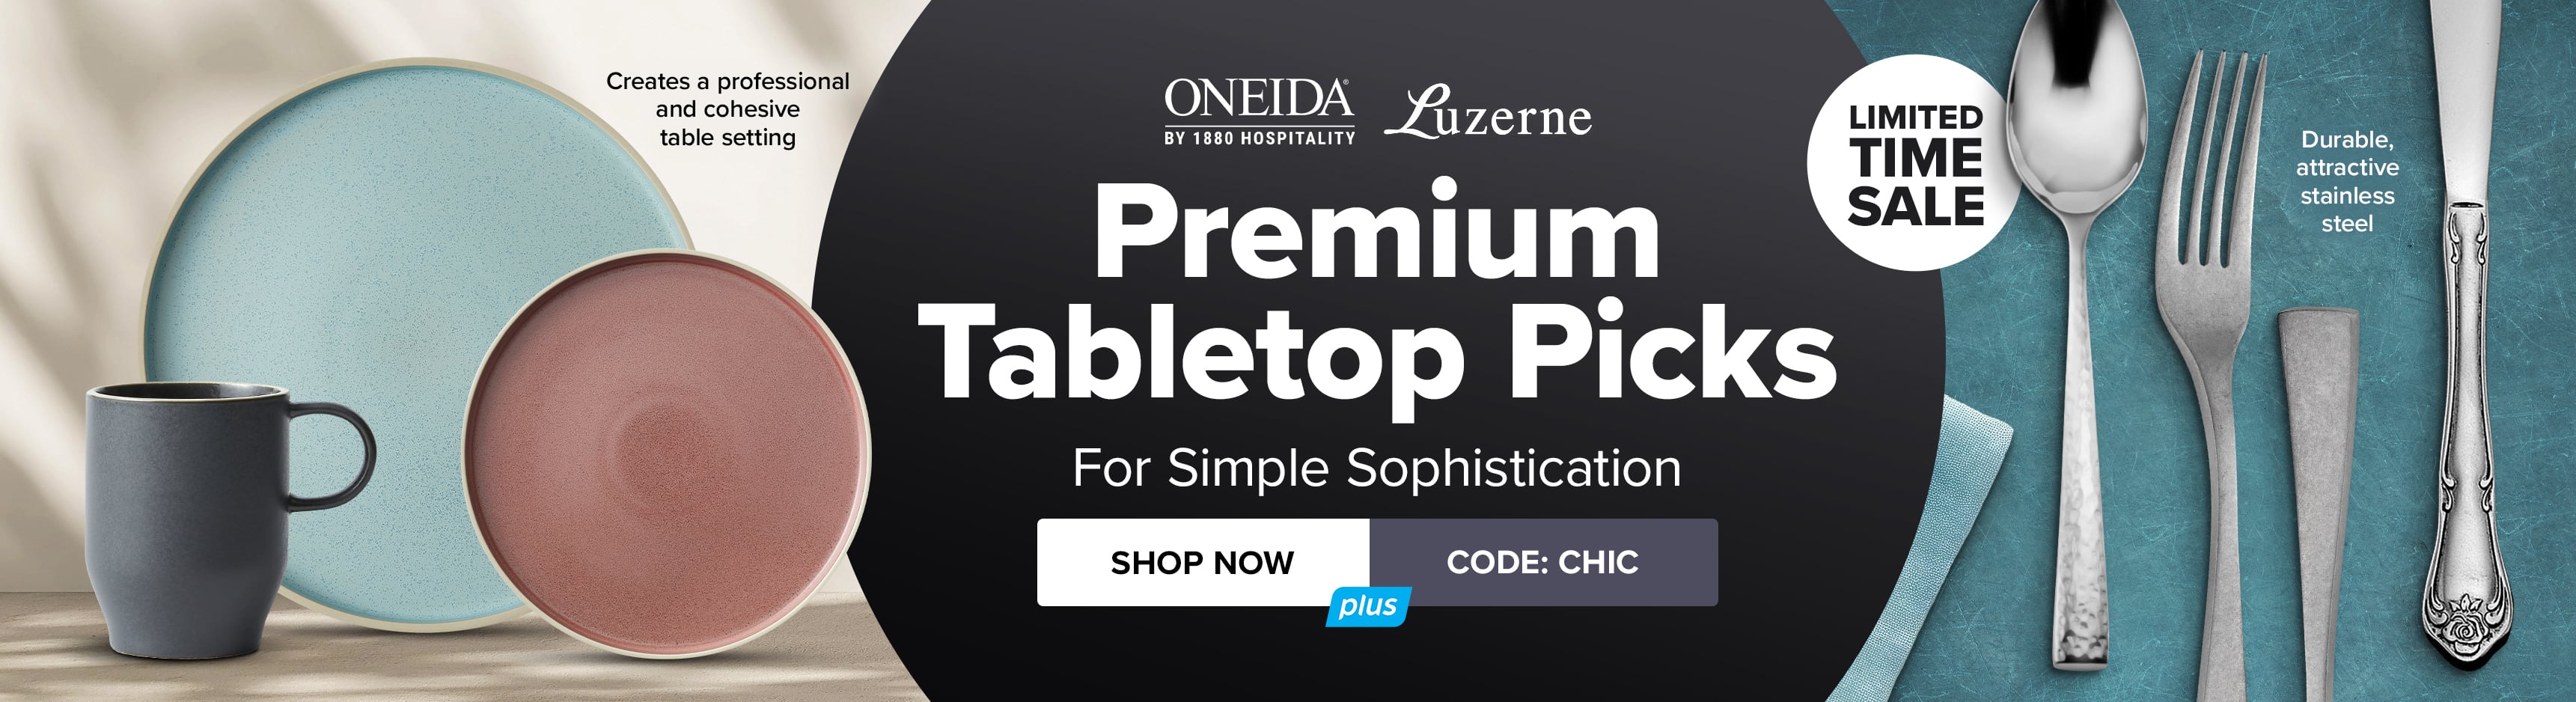 Premium Tabletop Picks. For Simple Sophistication. Shop Now. Use Code: CHIC. On Sale For A Limited Time.